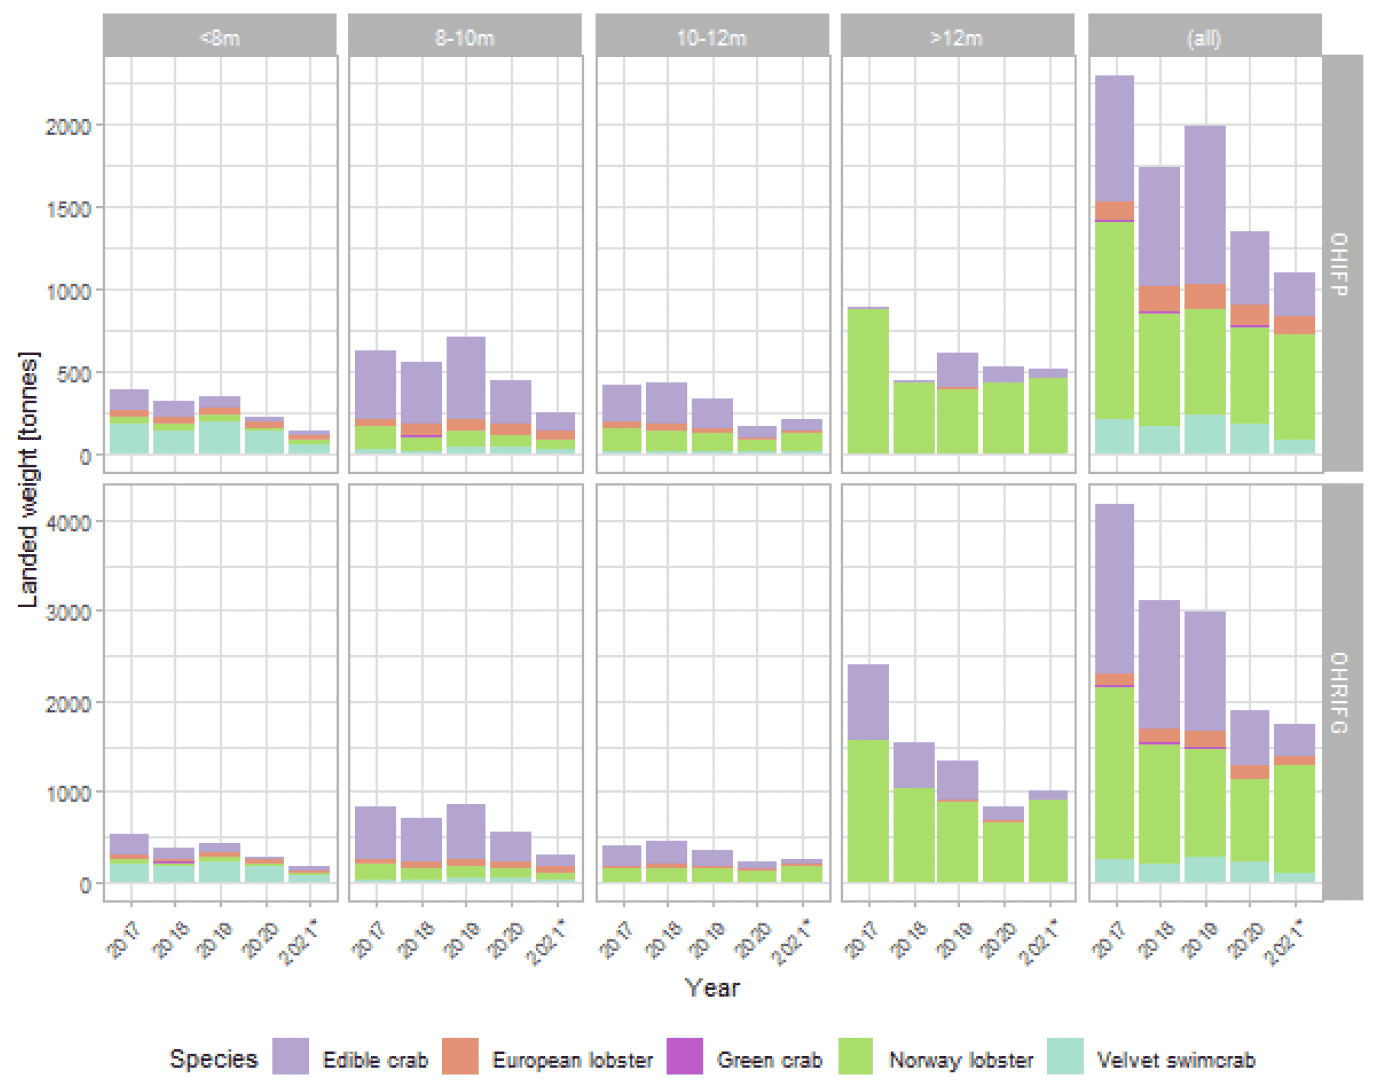 A series of bar graphs broken, showing the shellfish landing weights in different length categories, by species, from 2017 to 2021 (inclusive) for the OHRIFG area and pilot area. 